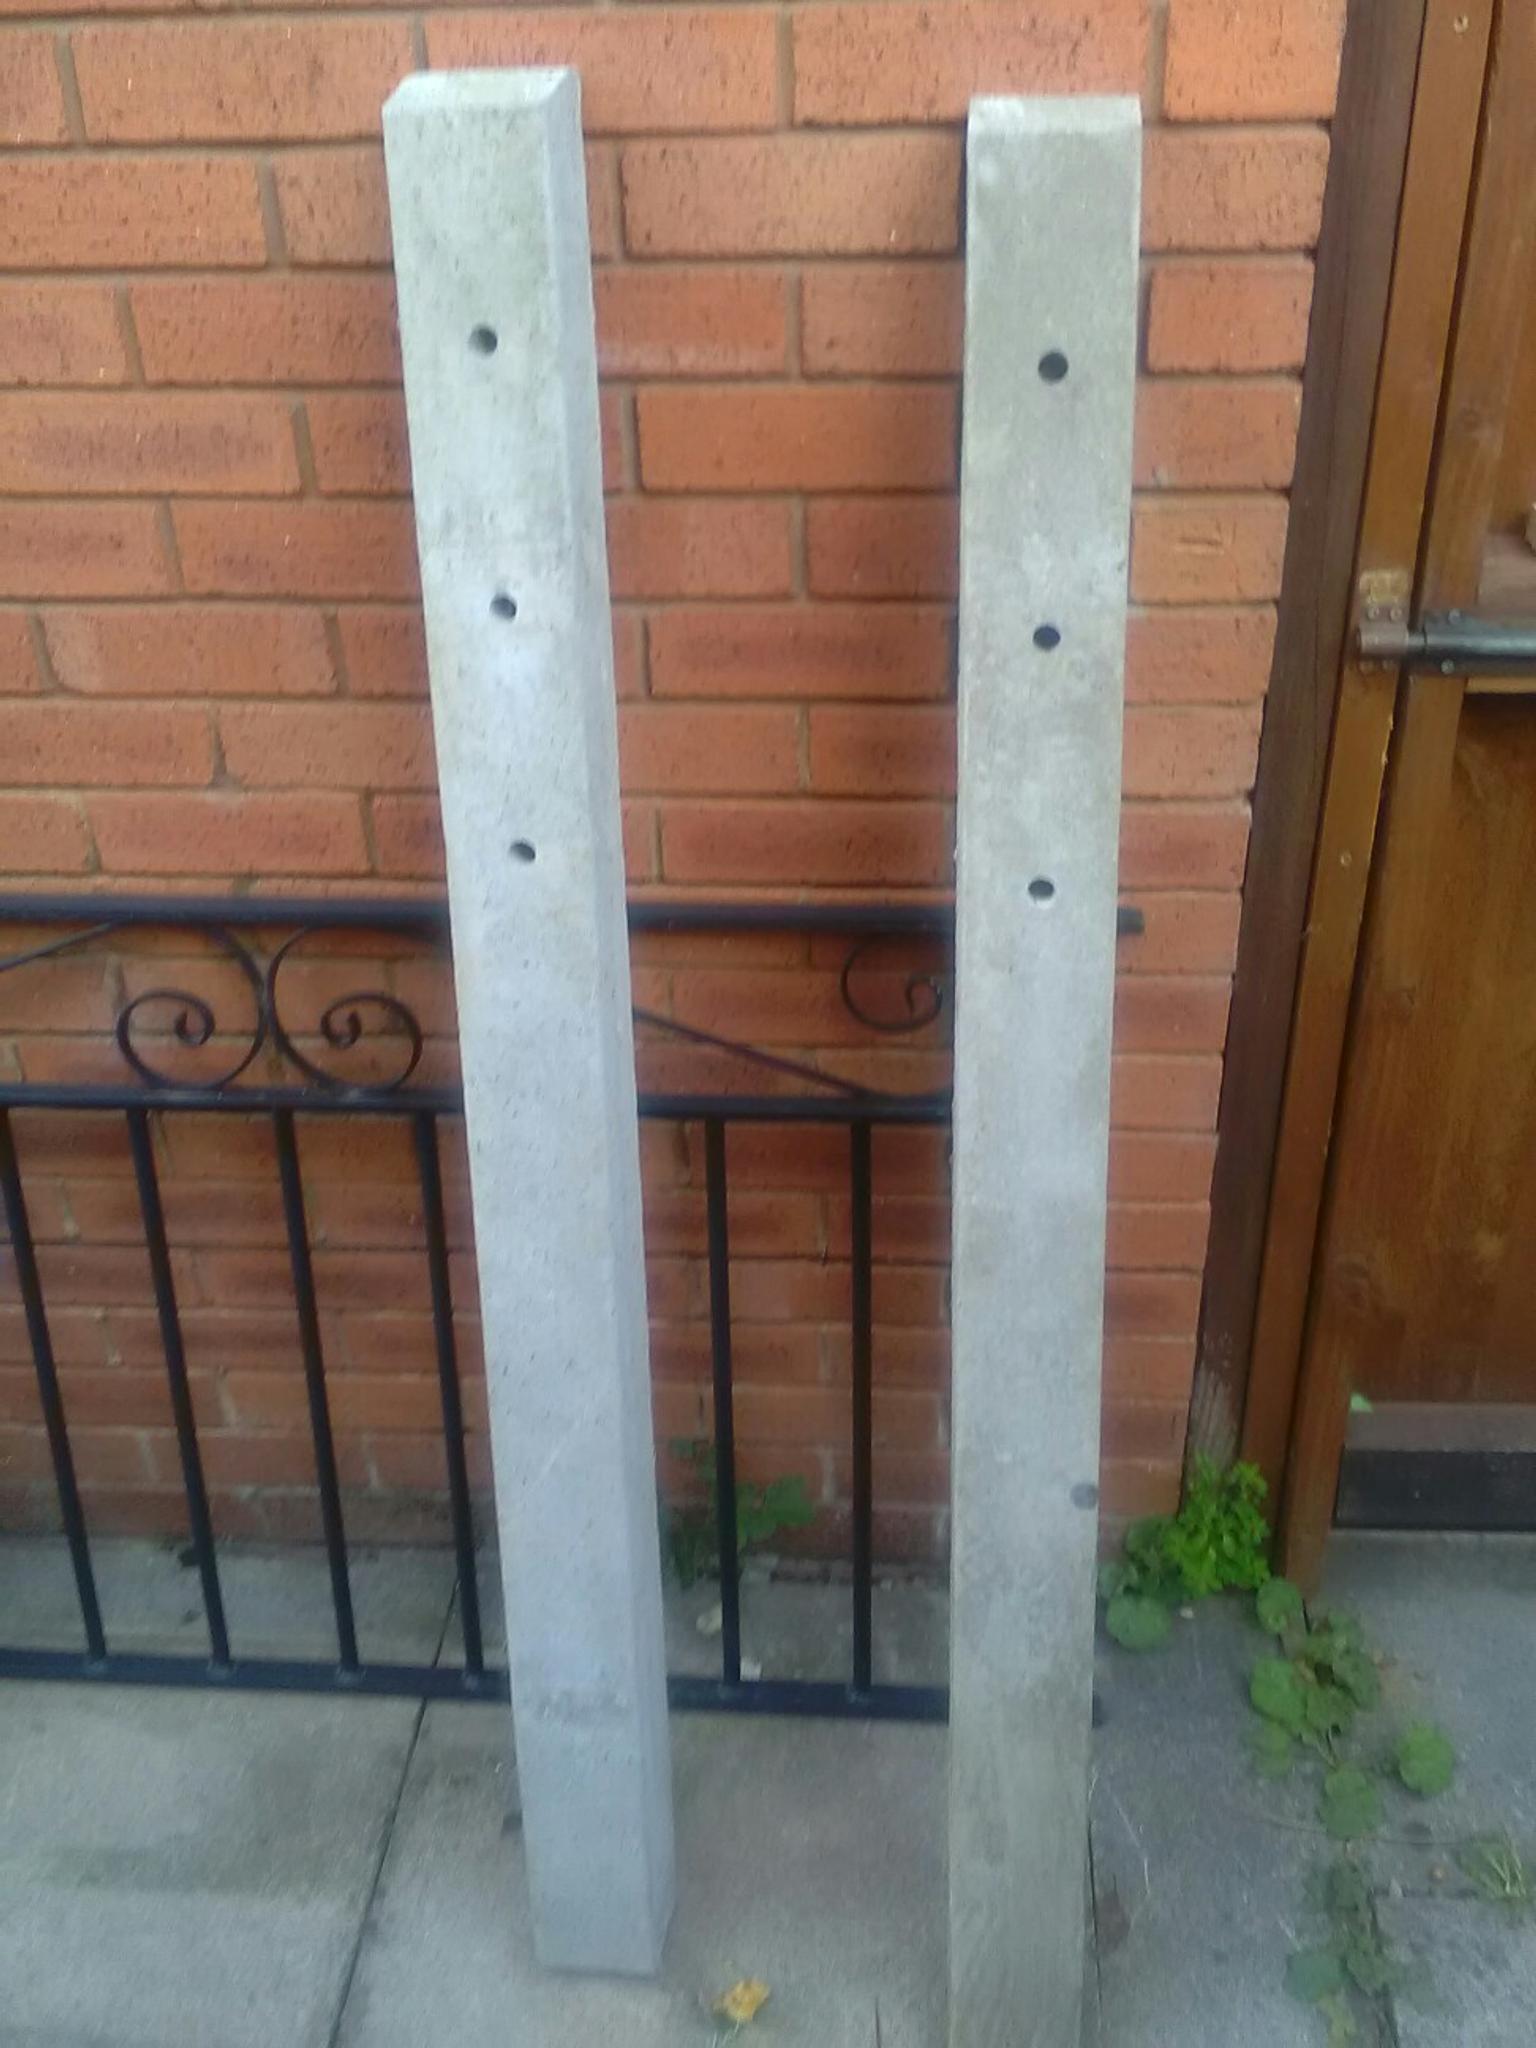 concrete posts for fence post support, in LE4 Leicester for £6.00 for